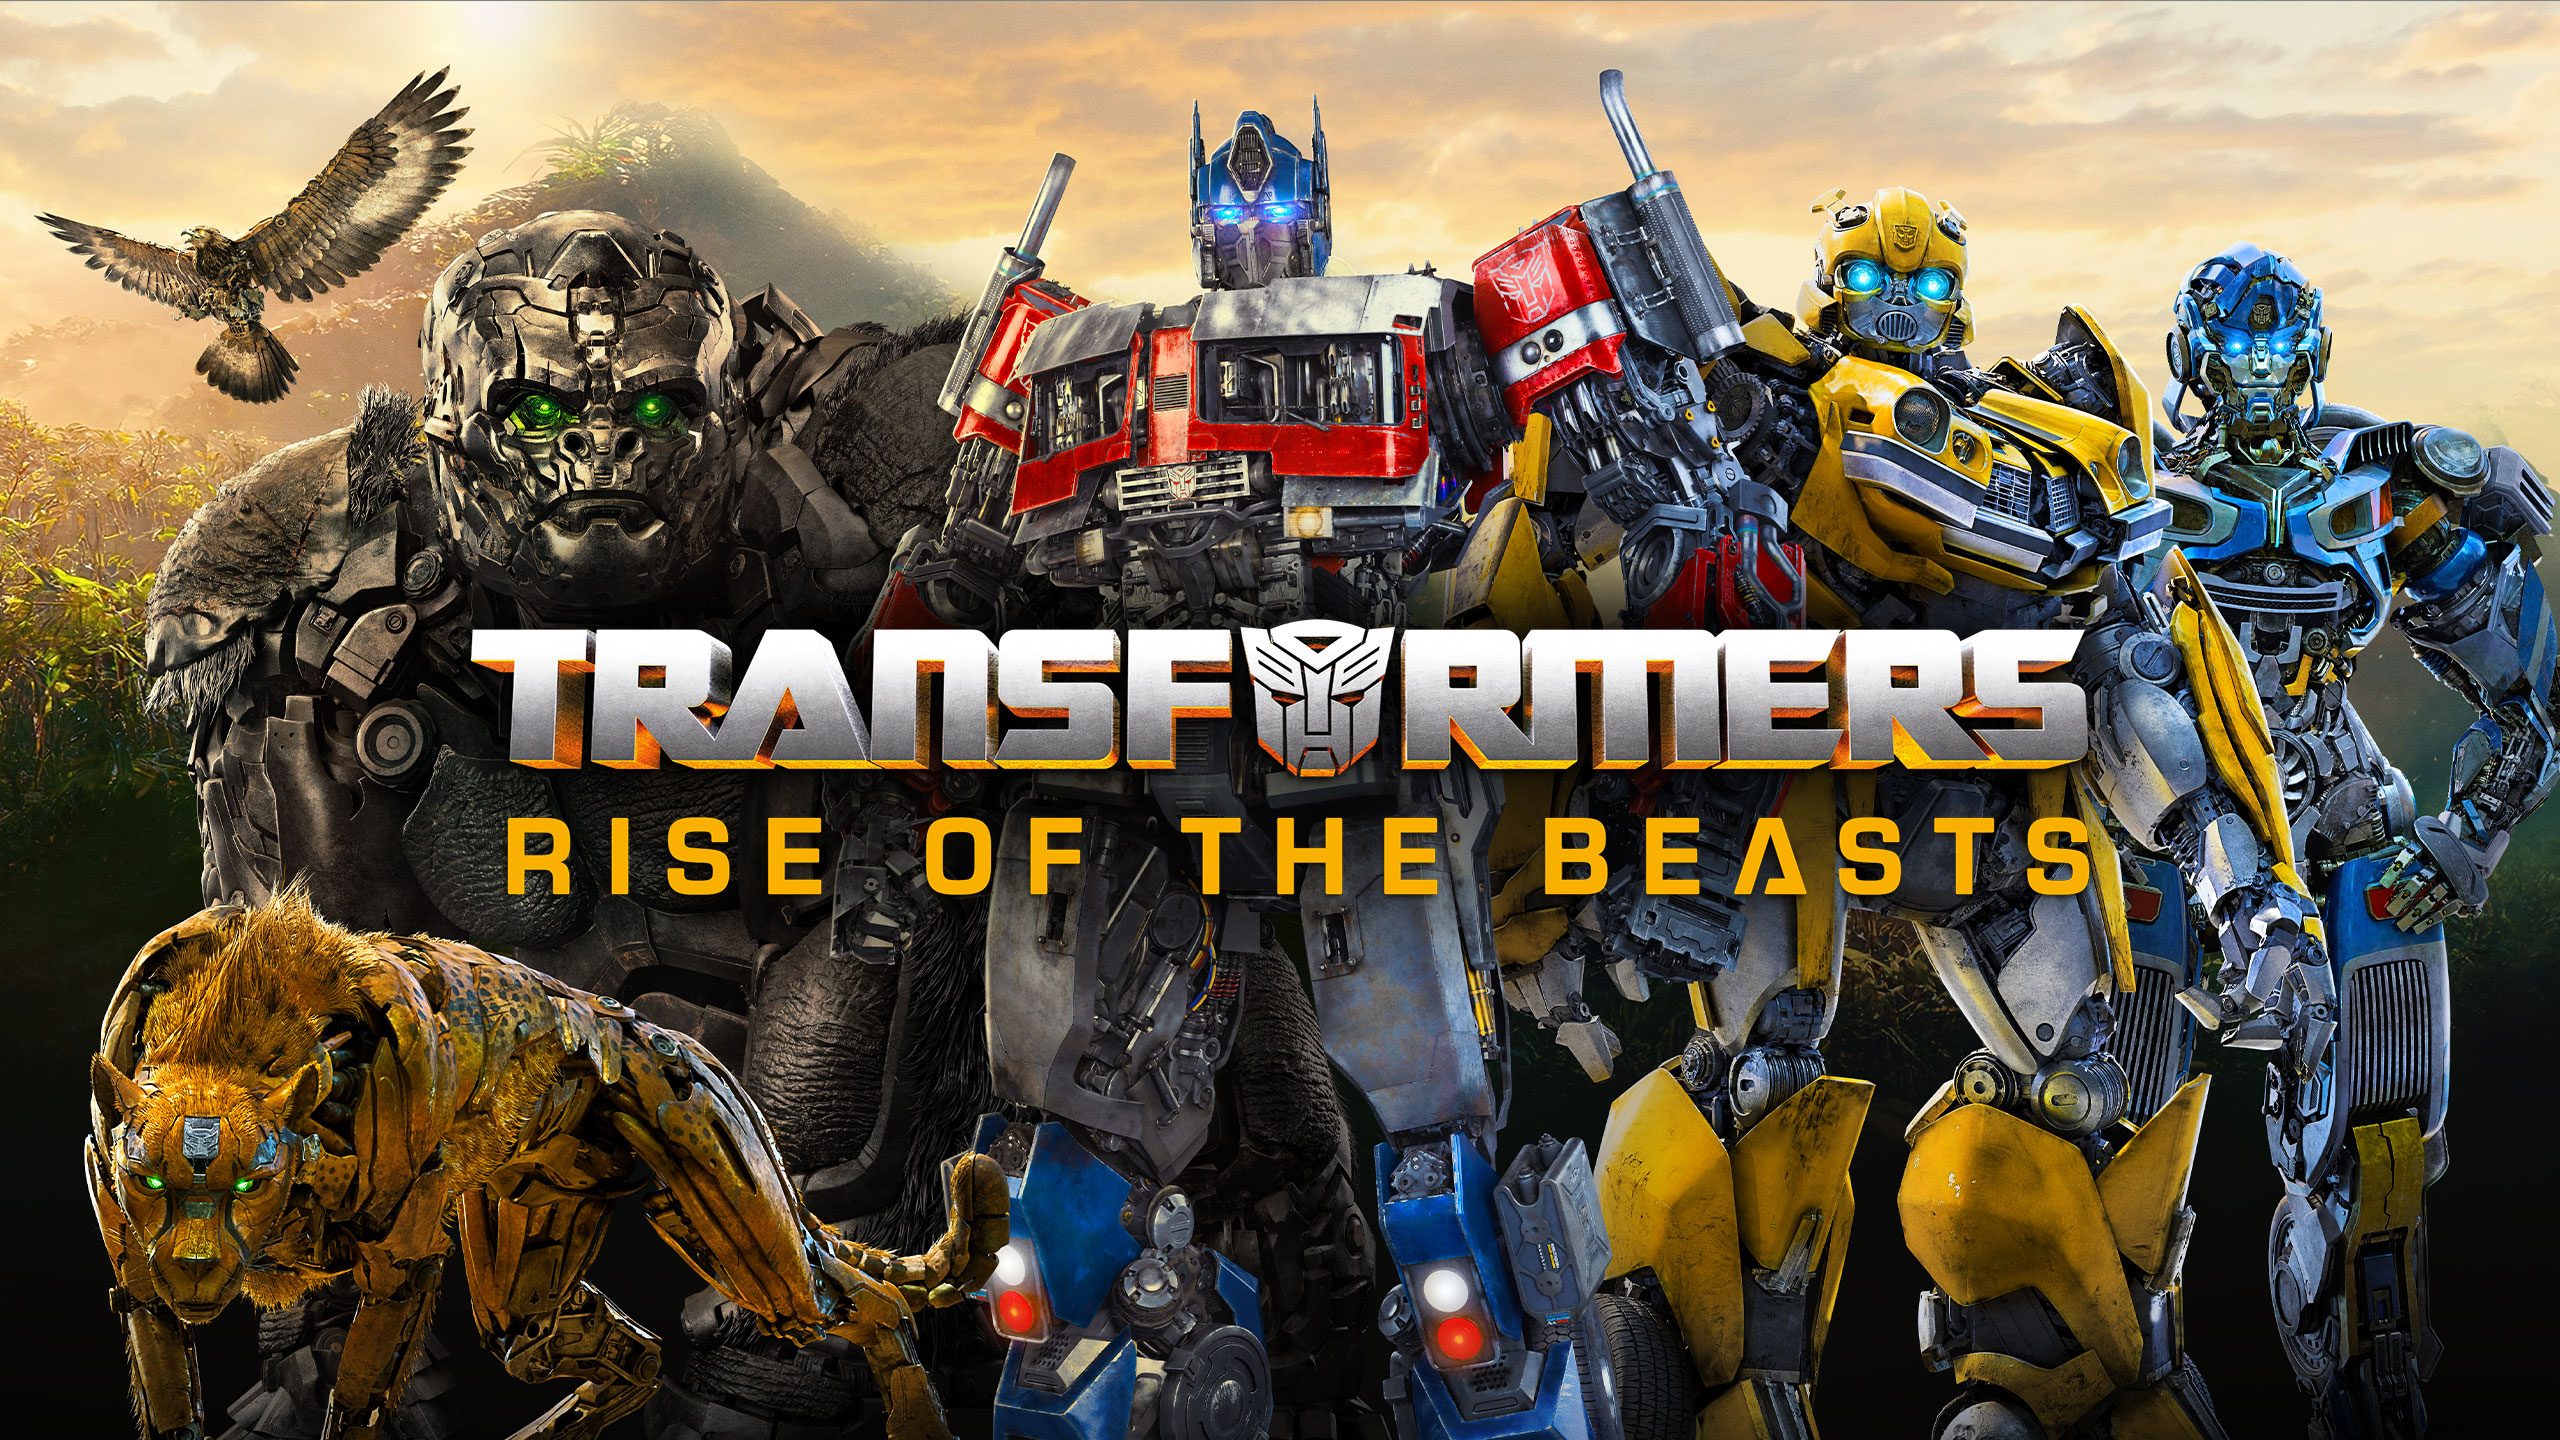 TRANSFORMERS 7: RISE OF THE BEASTS u2013 Final Trailer (2023) Paramount Pictures Movie (New)